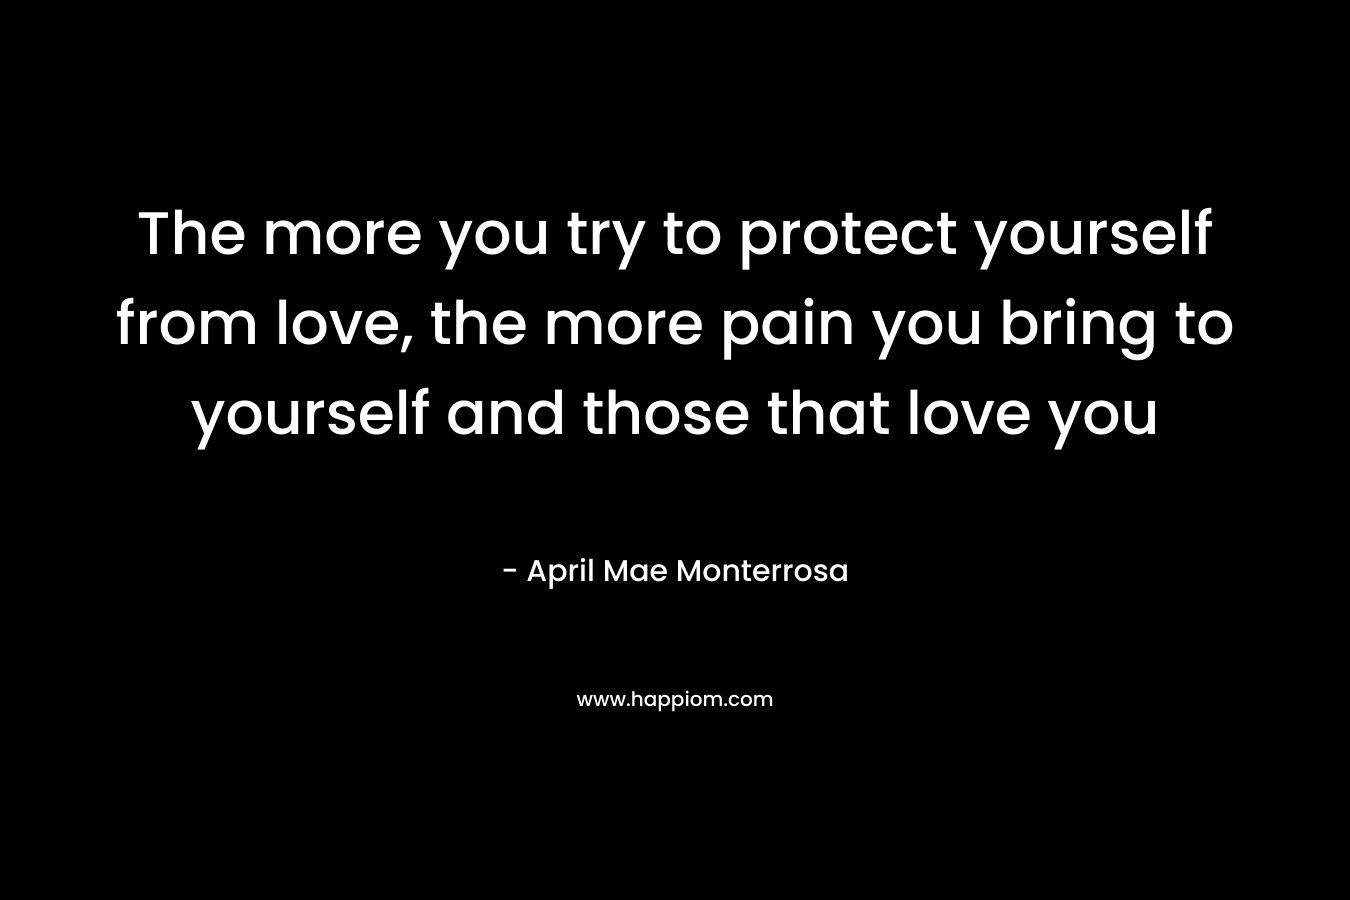 The more you try to protect yourself from love, the more pain you bring to yourself and those that love you